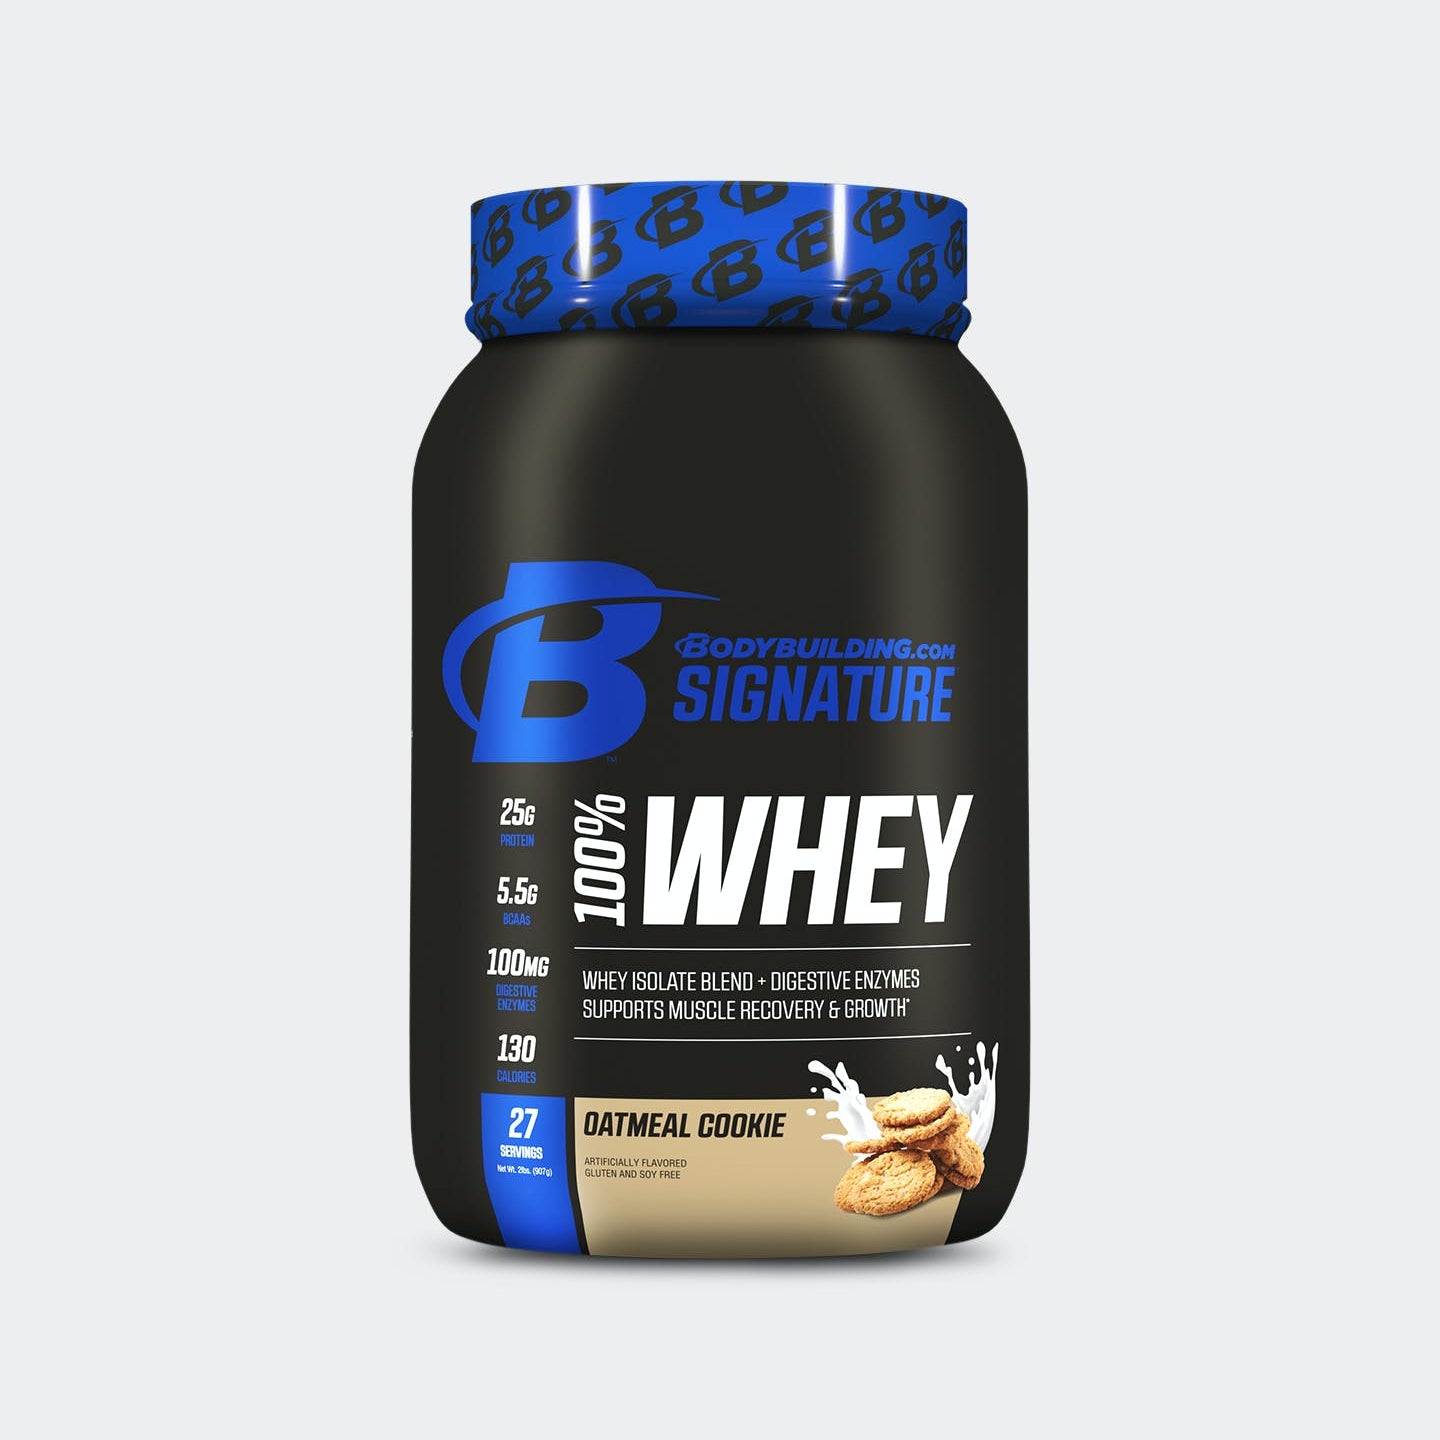 Bodybuilding.com Signature Signature 100% Whey Protein Powder, Oatmeal Cookie, 2 Lbs.